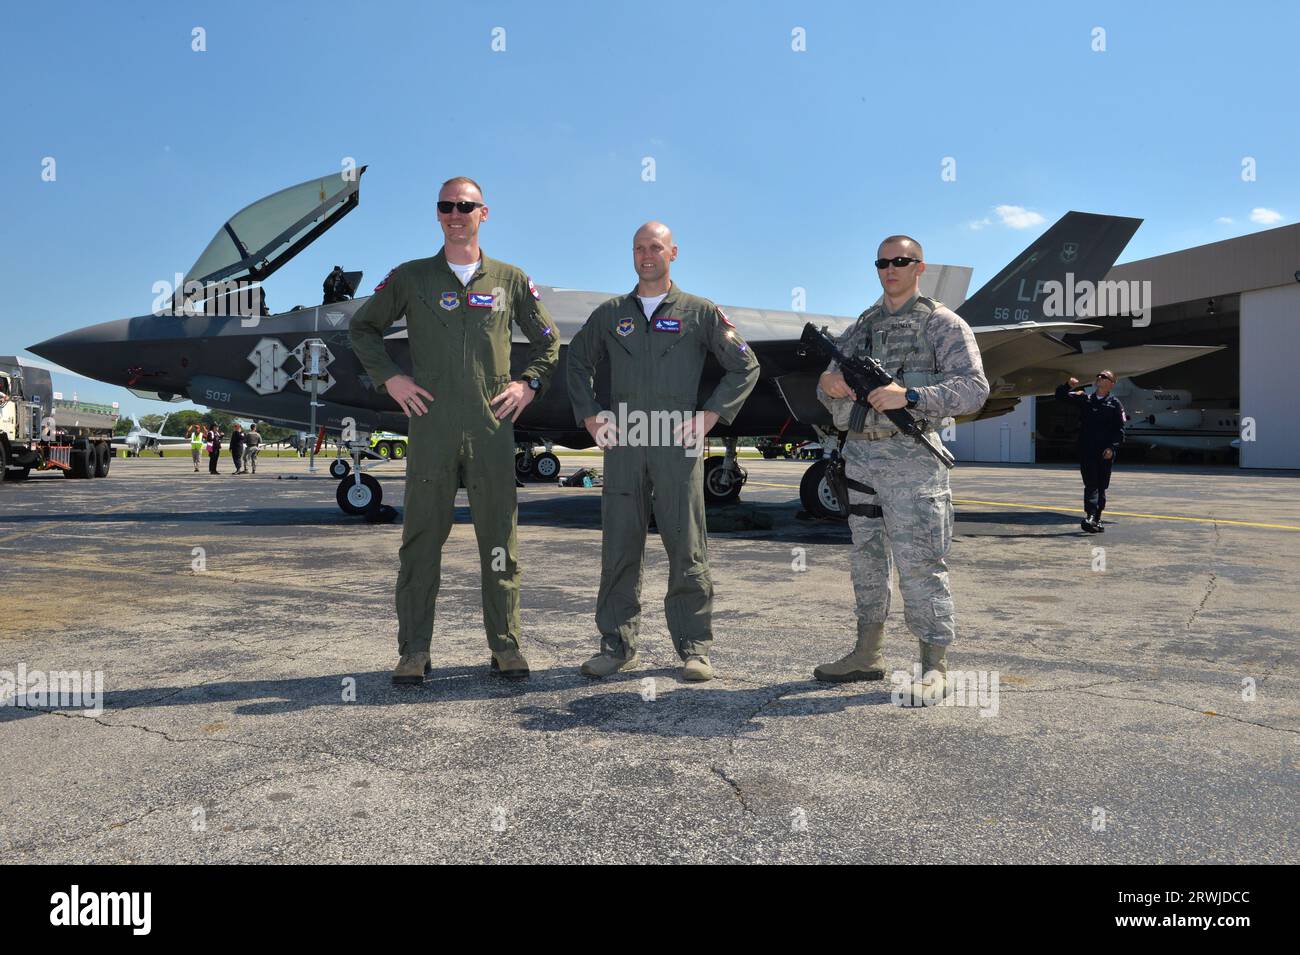 FORT LAUDERDALE, FLORIDA - MAY 05: F-35 Lightning II Joint Strike Fighter. This is the FIRST TIME the F35 is flying out of a civilian airport to support an air show seen here at a private FBO at Fort Lauderdale-Hollywood International Airport on May 5, 2016 in Fort Lauderdale, Florida. People: F-35 Lightning II Joint Strike Fighter Credit: Storms Media Group/Alamy Live News Stock Photo